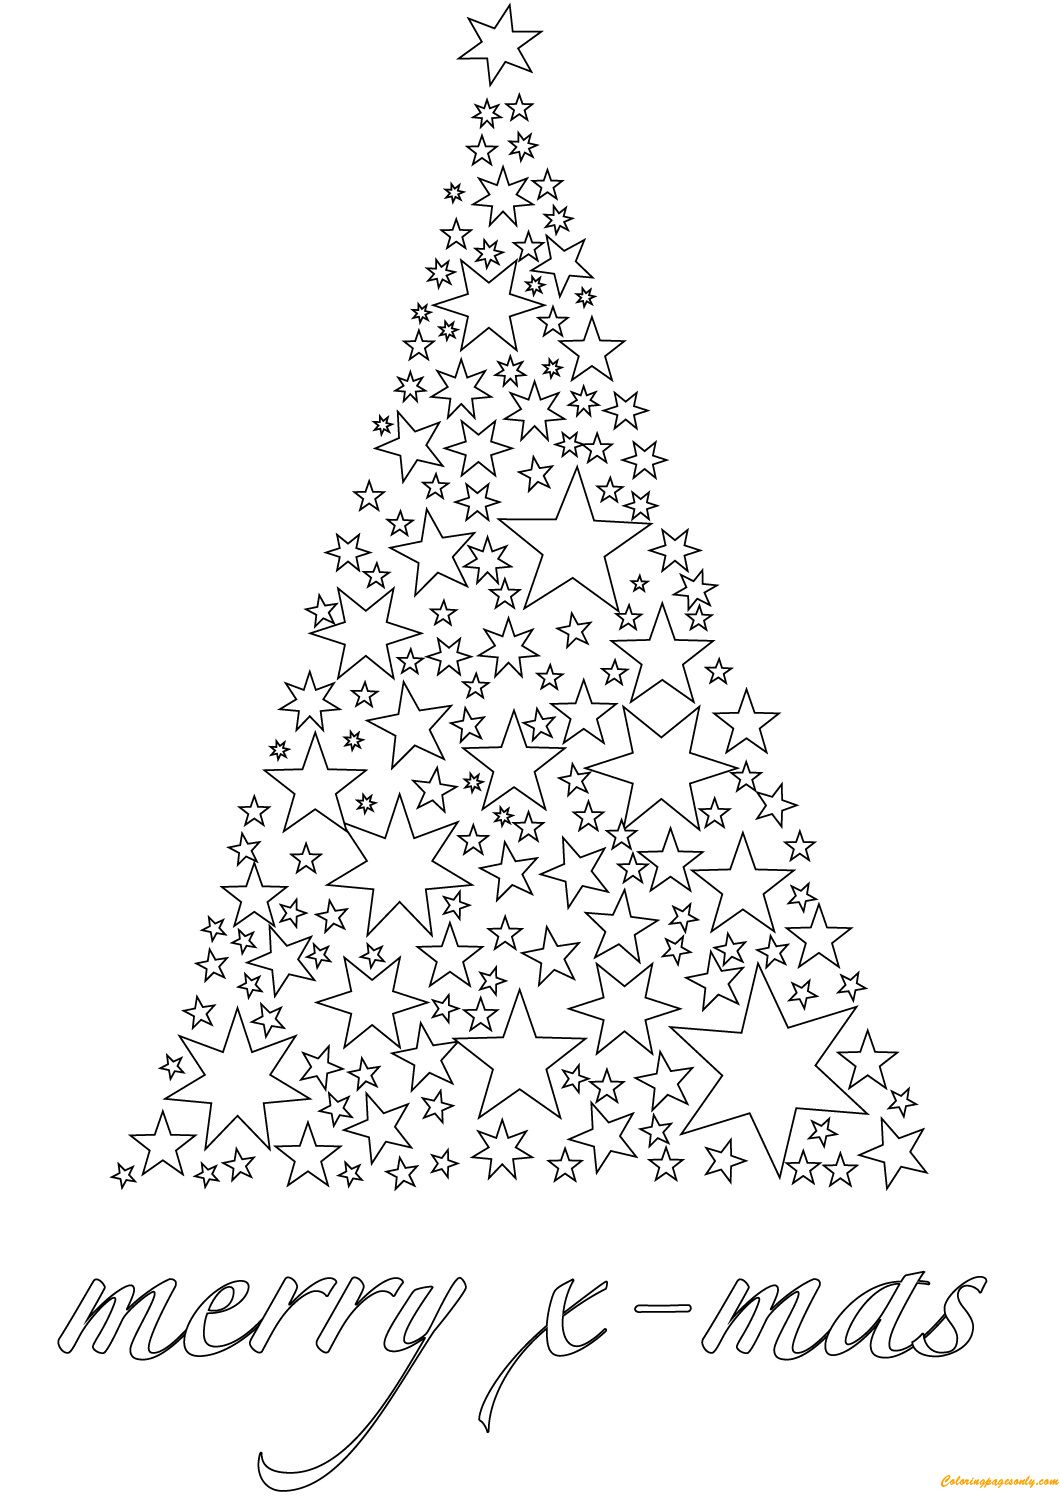 Merry Christmas Greeting Card Coloring Pages